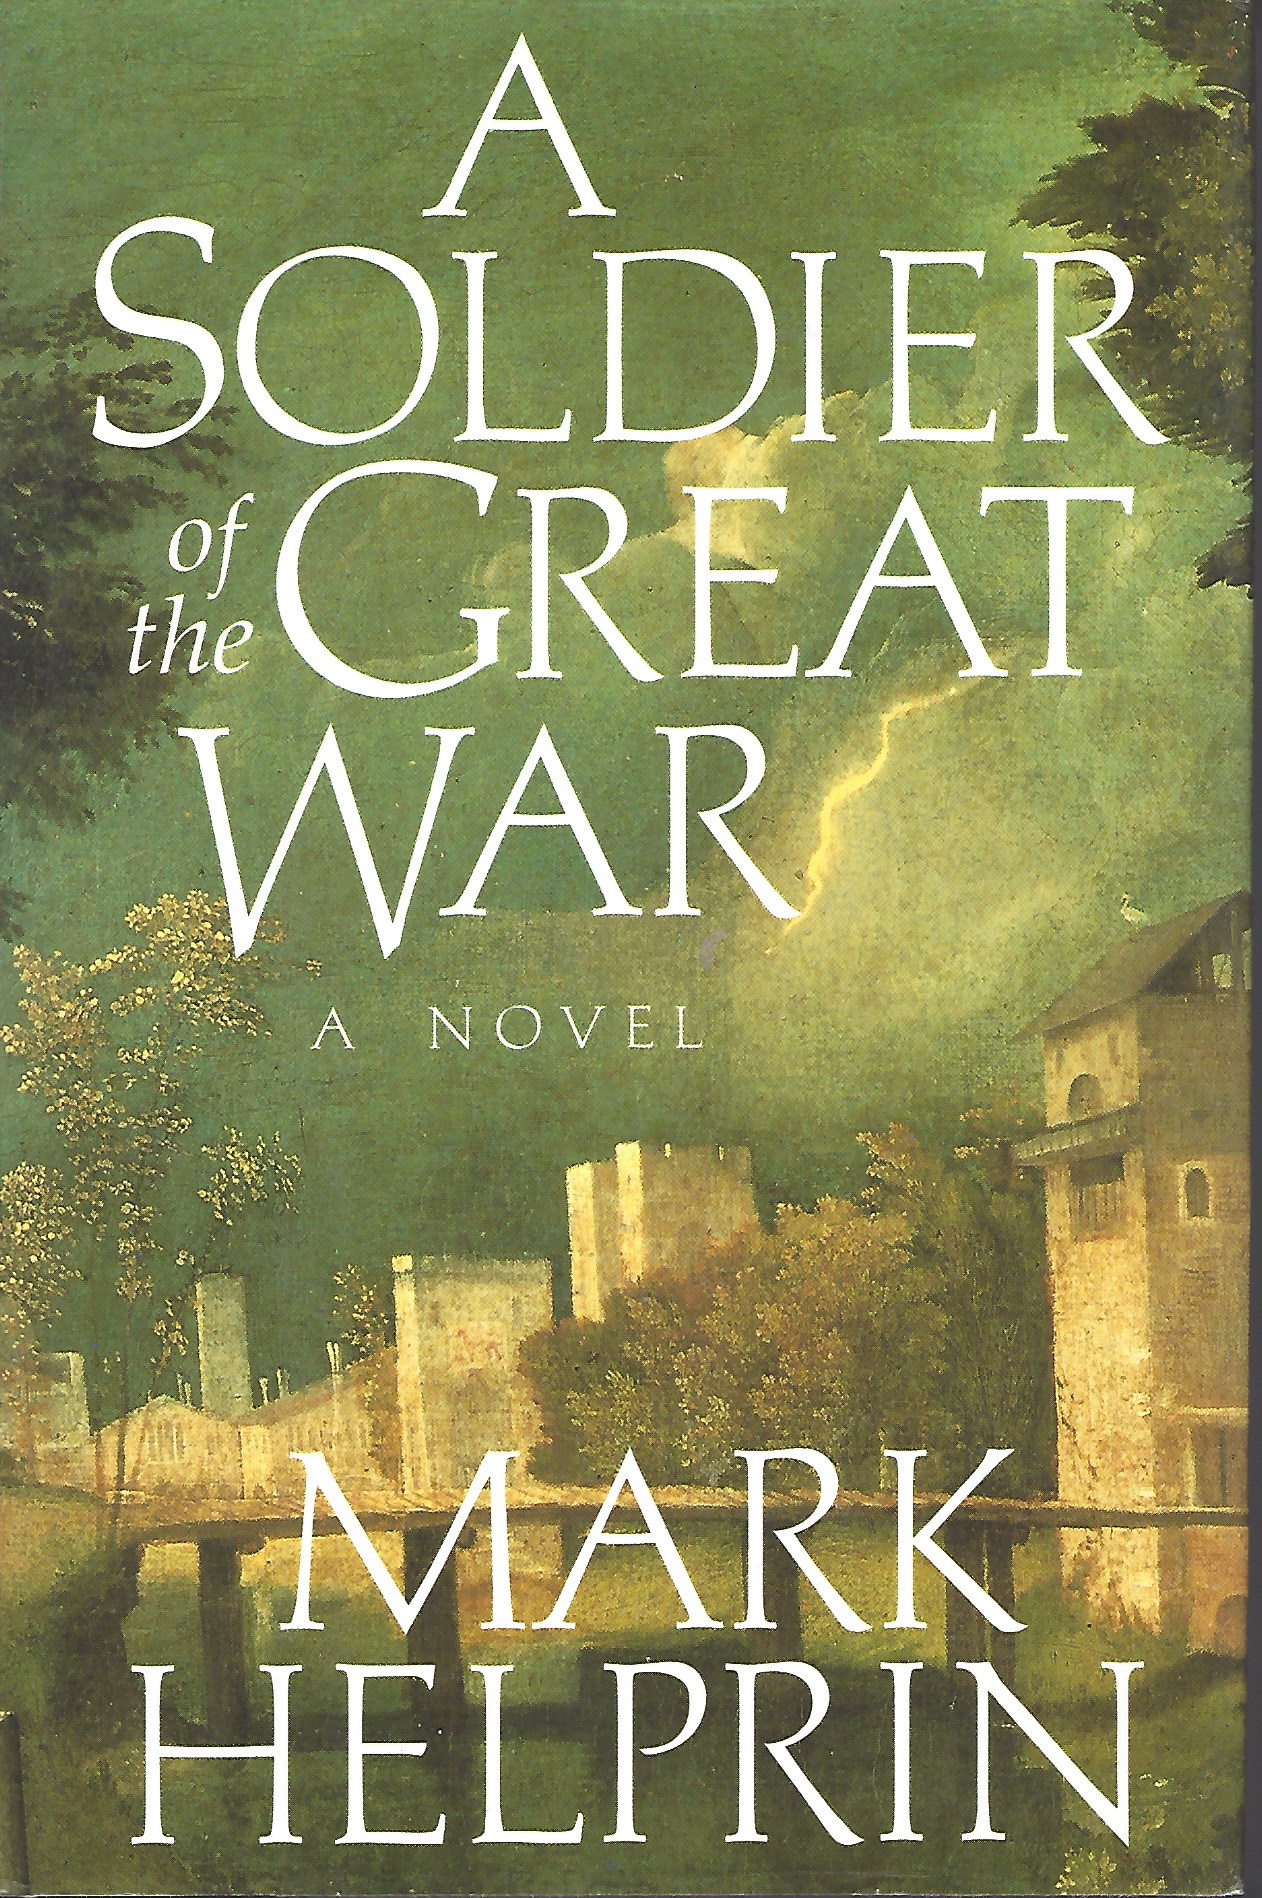 HELPRIN MARK - A Soldier of the Great War